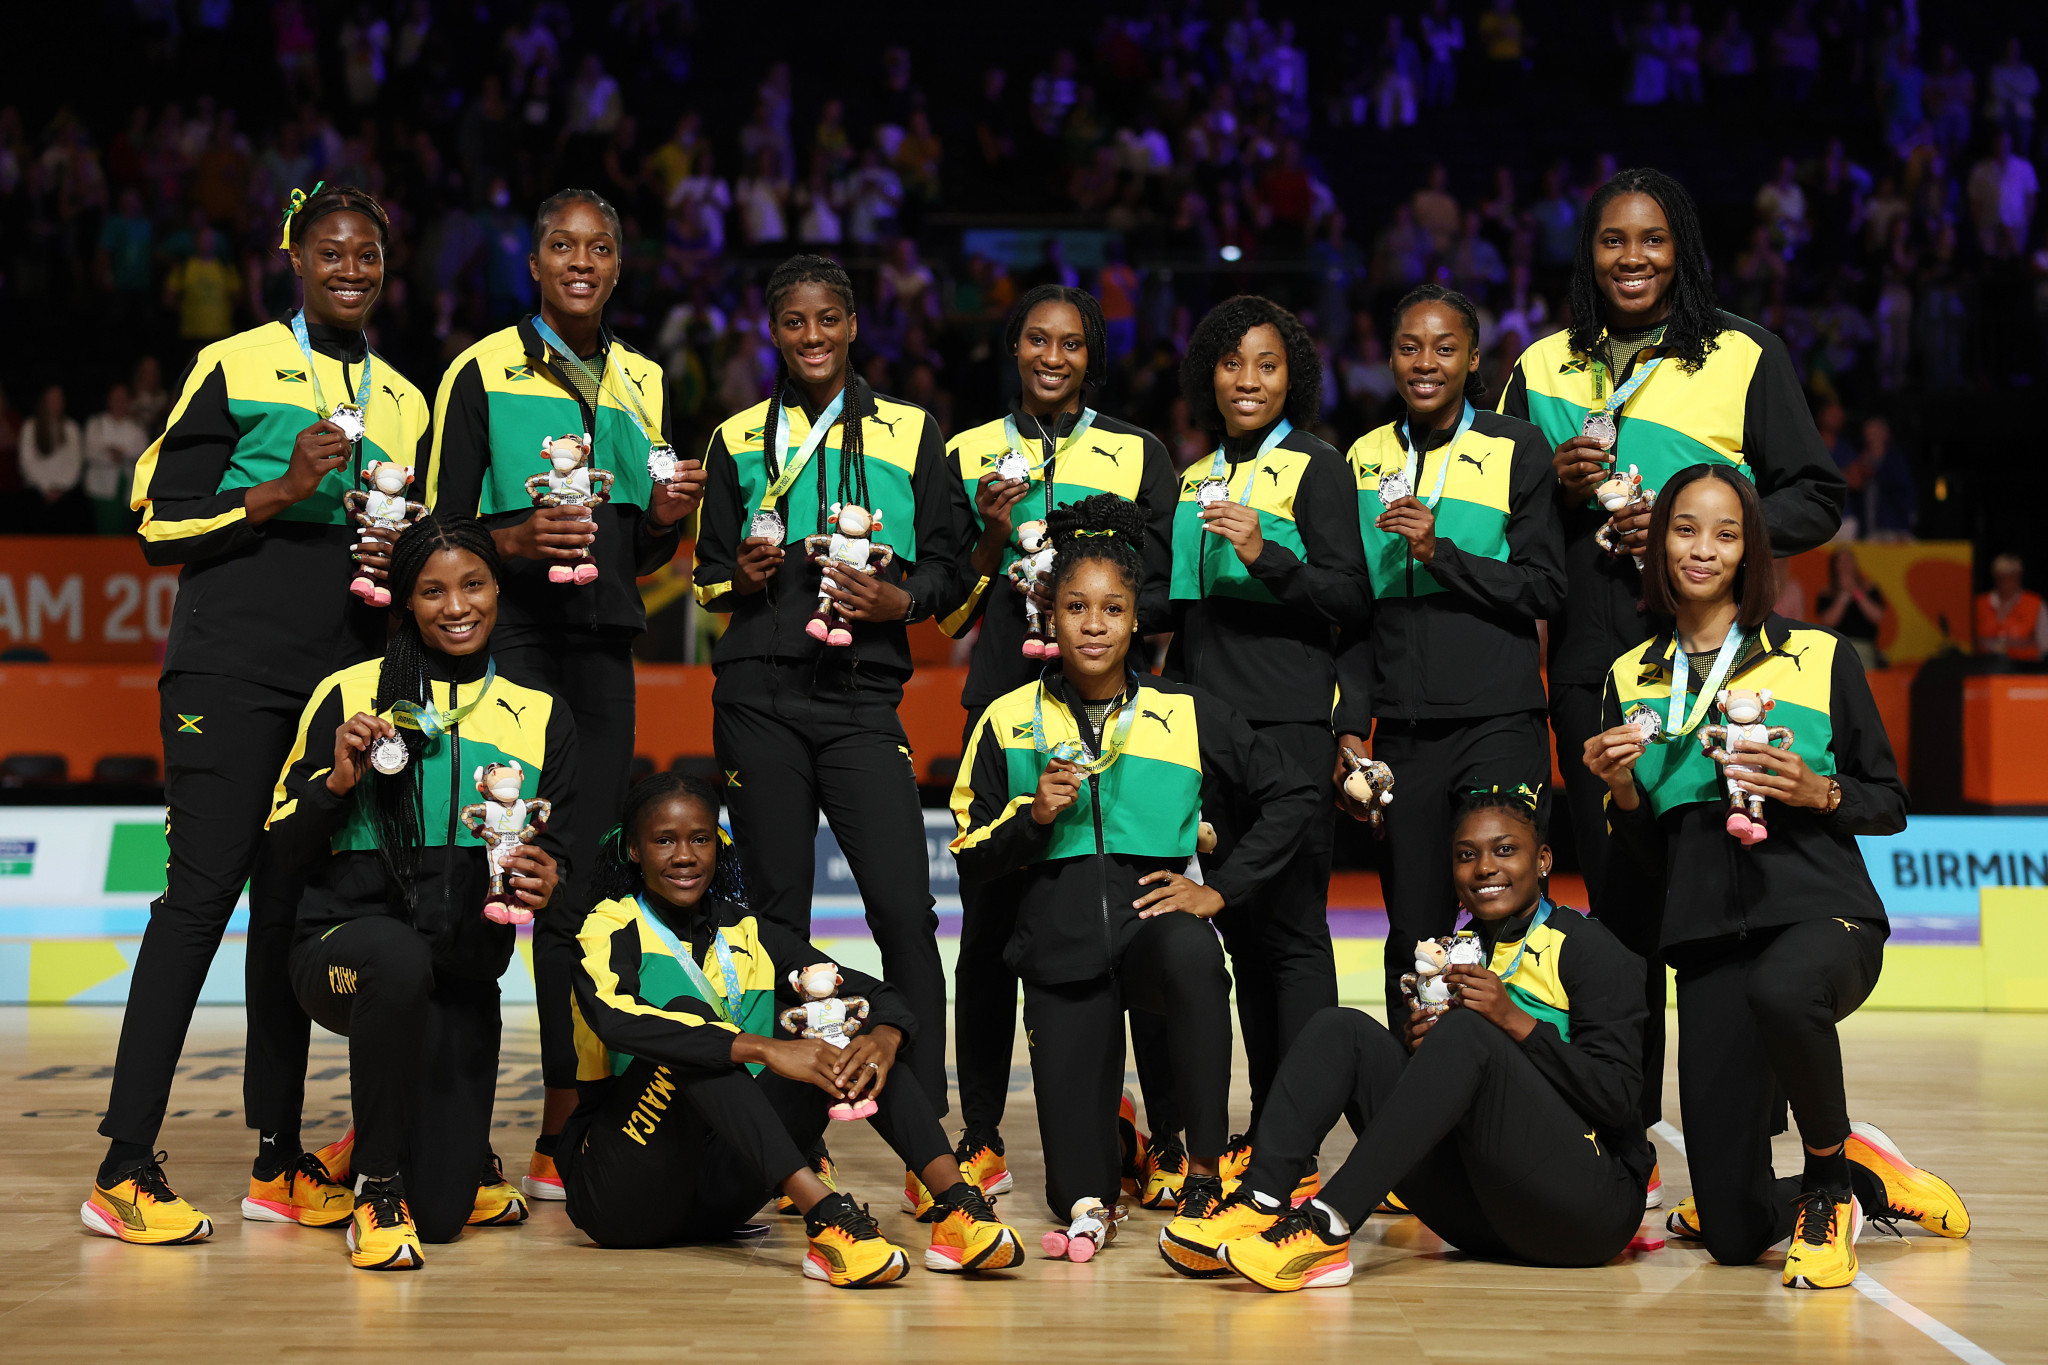 Latanya Wilson was a member of Jamaica's silver medal winning team at the Birmingham 2022 Commonwealth Games ©Getty Images